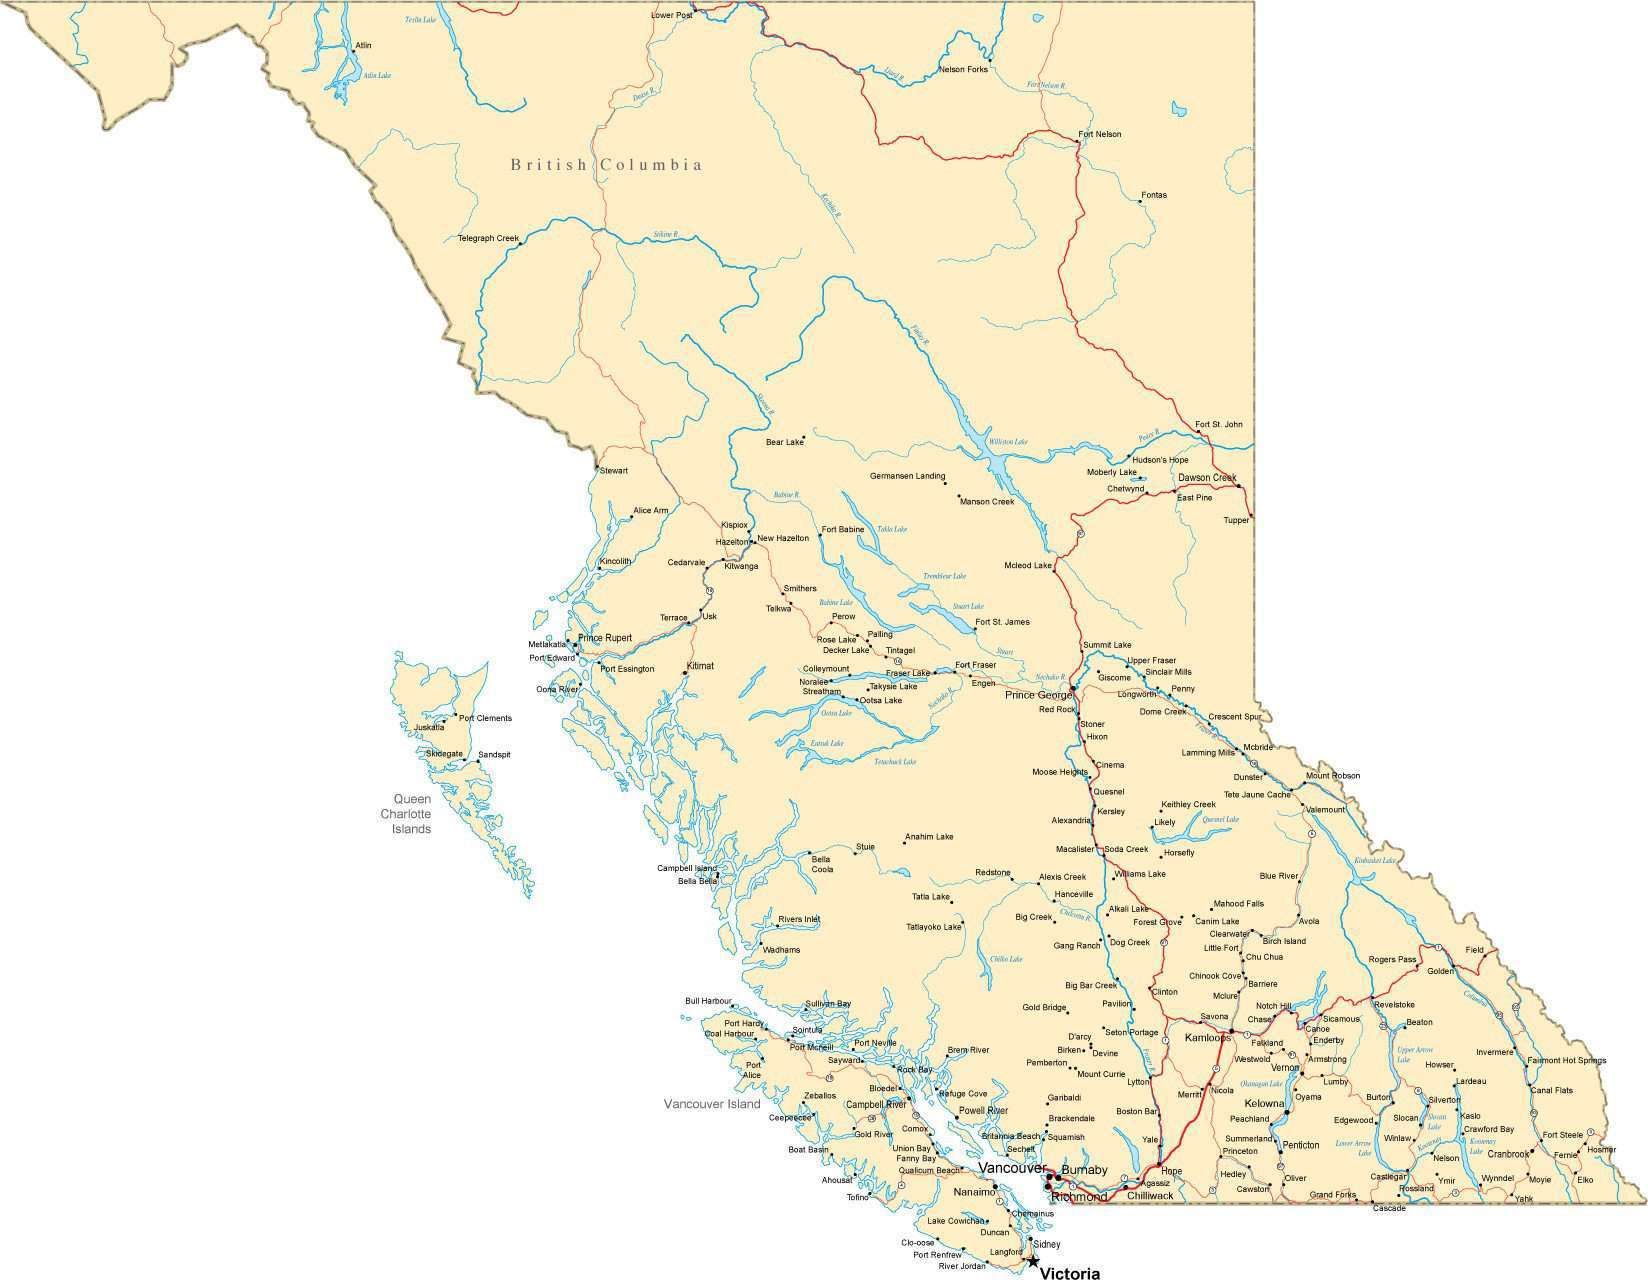 British Columbia Fit-Together style map in Adobe Illustrator format